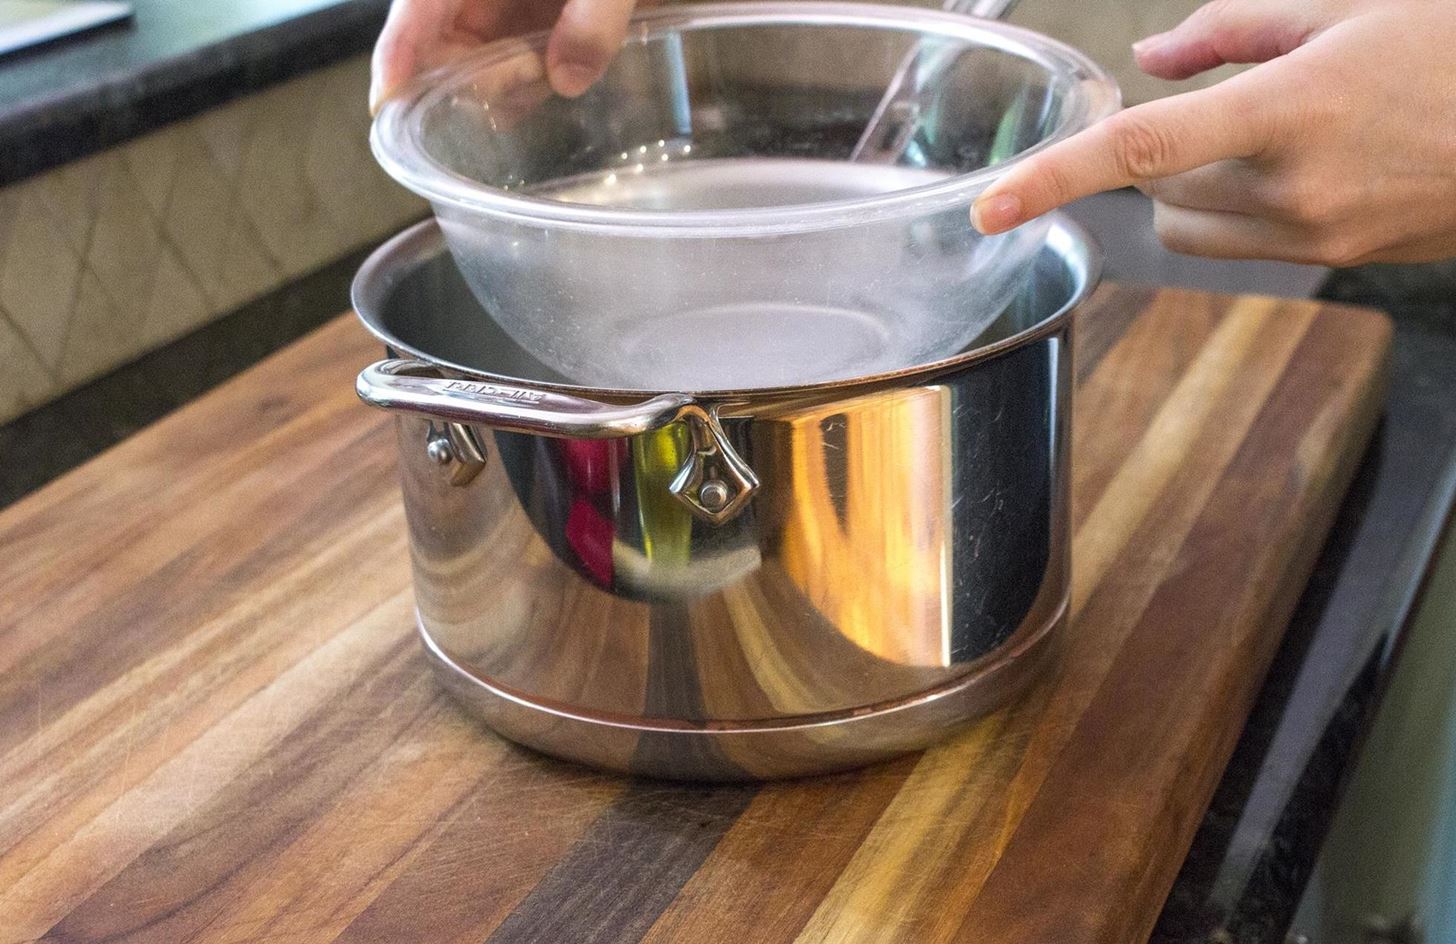 How to Keep Your Bowl from Slipping When Mixing Ingredients